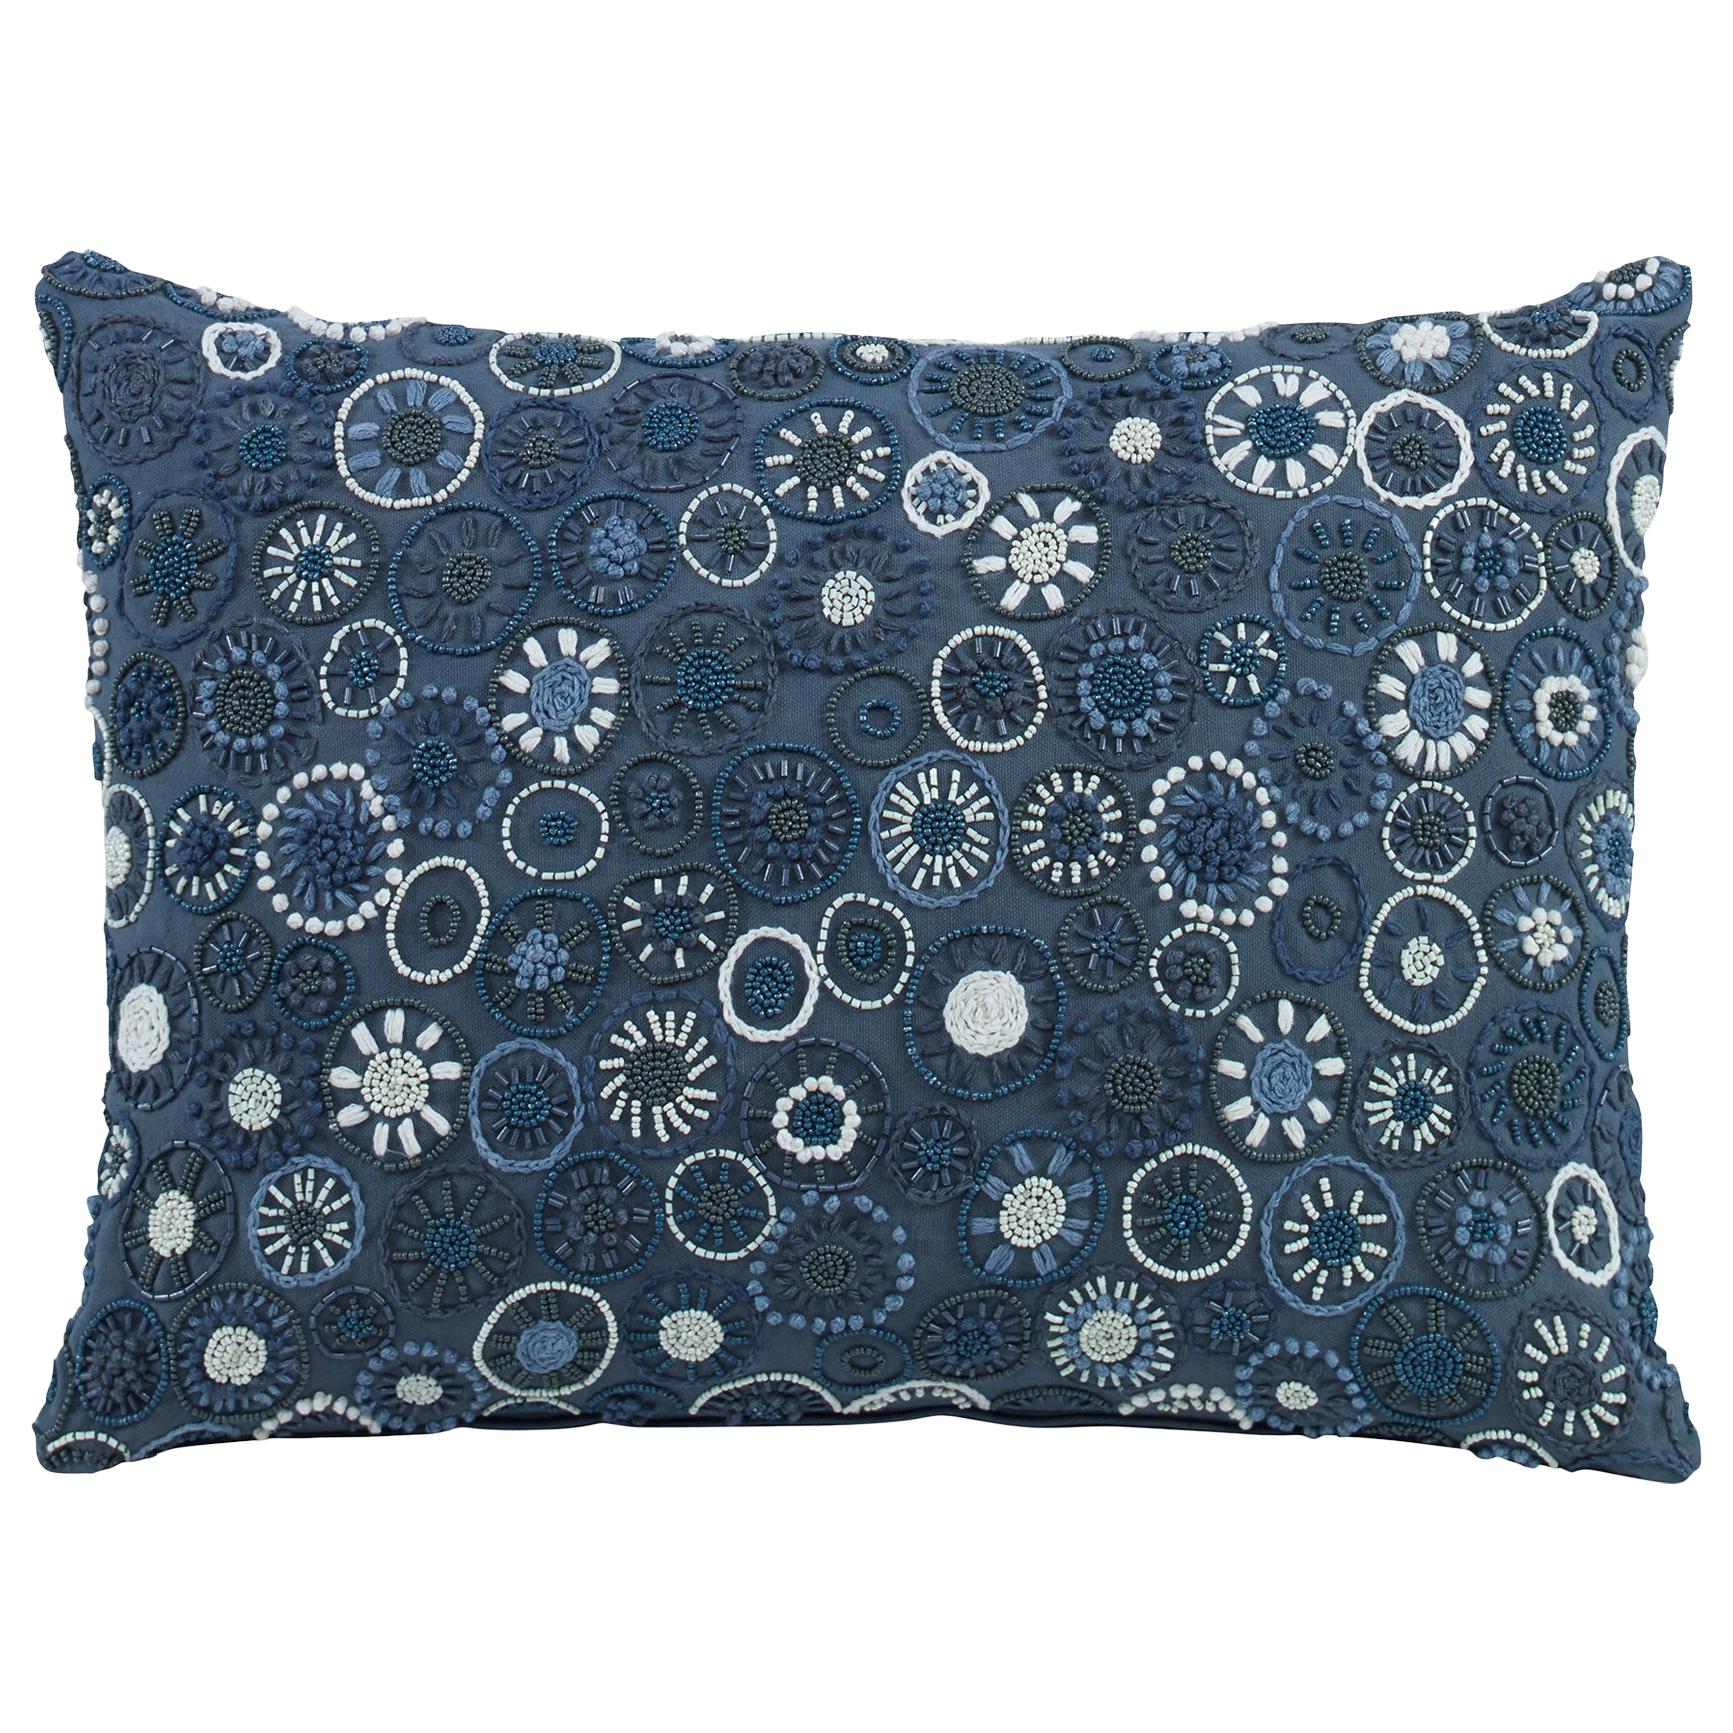 Cerritos Hand-Embroidered Accent Pillow in Dotted Pattern by CuratedKravet